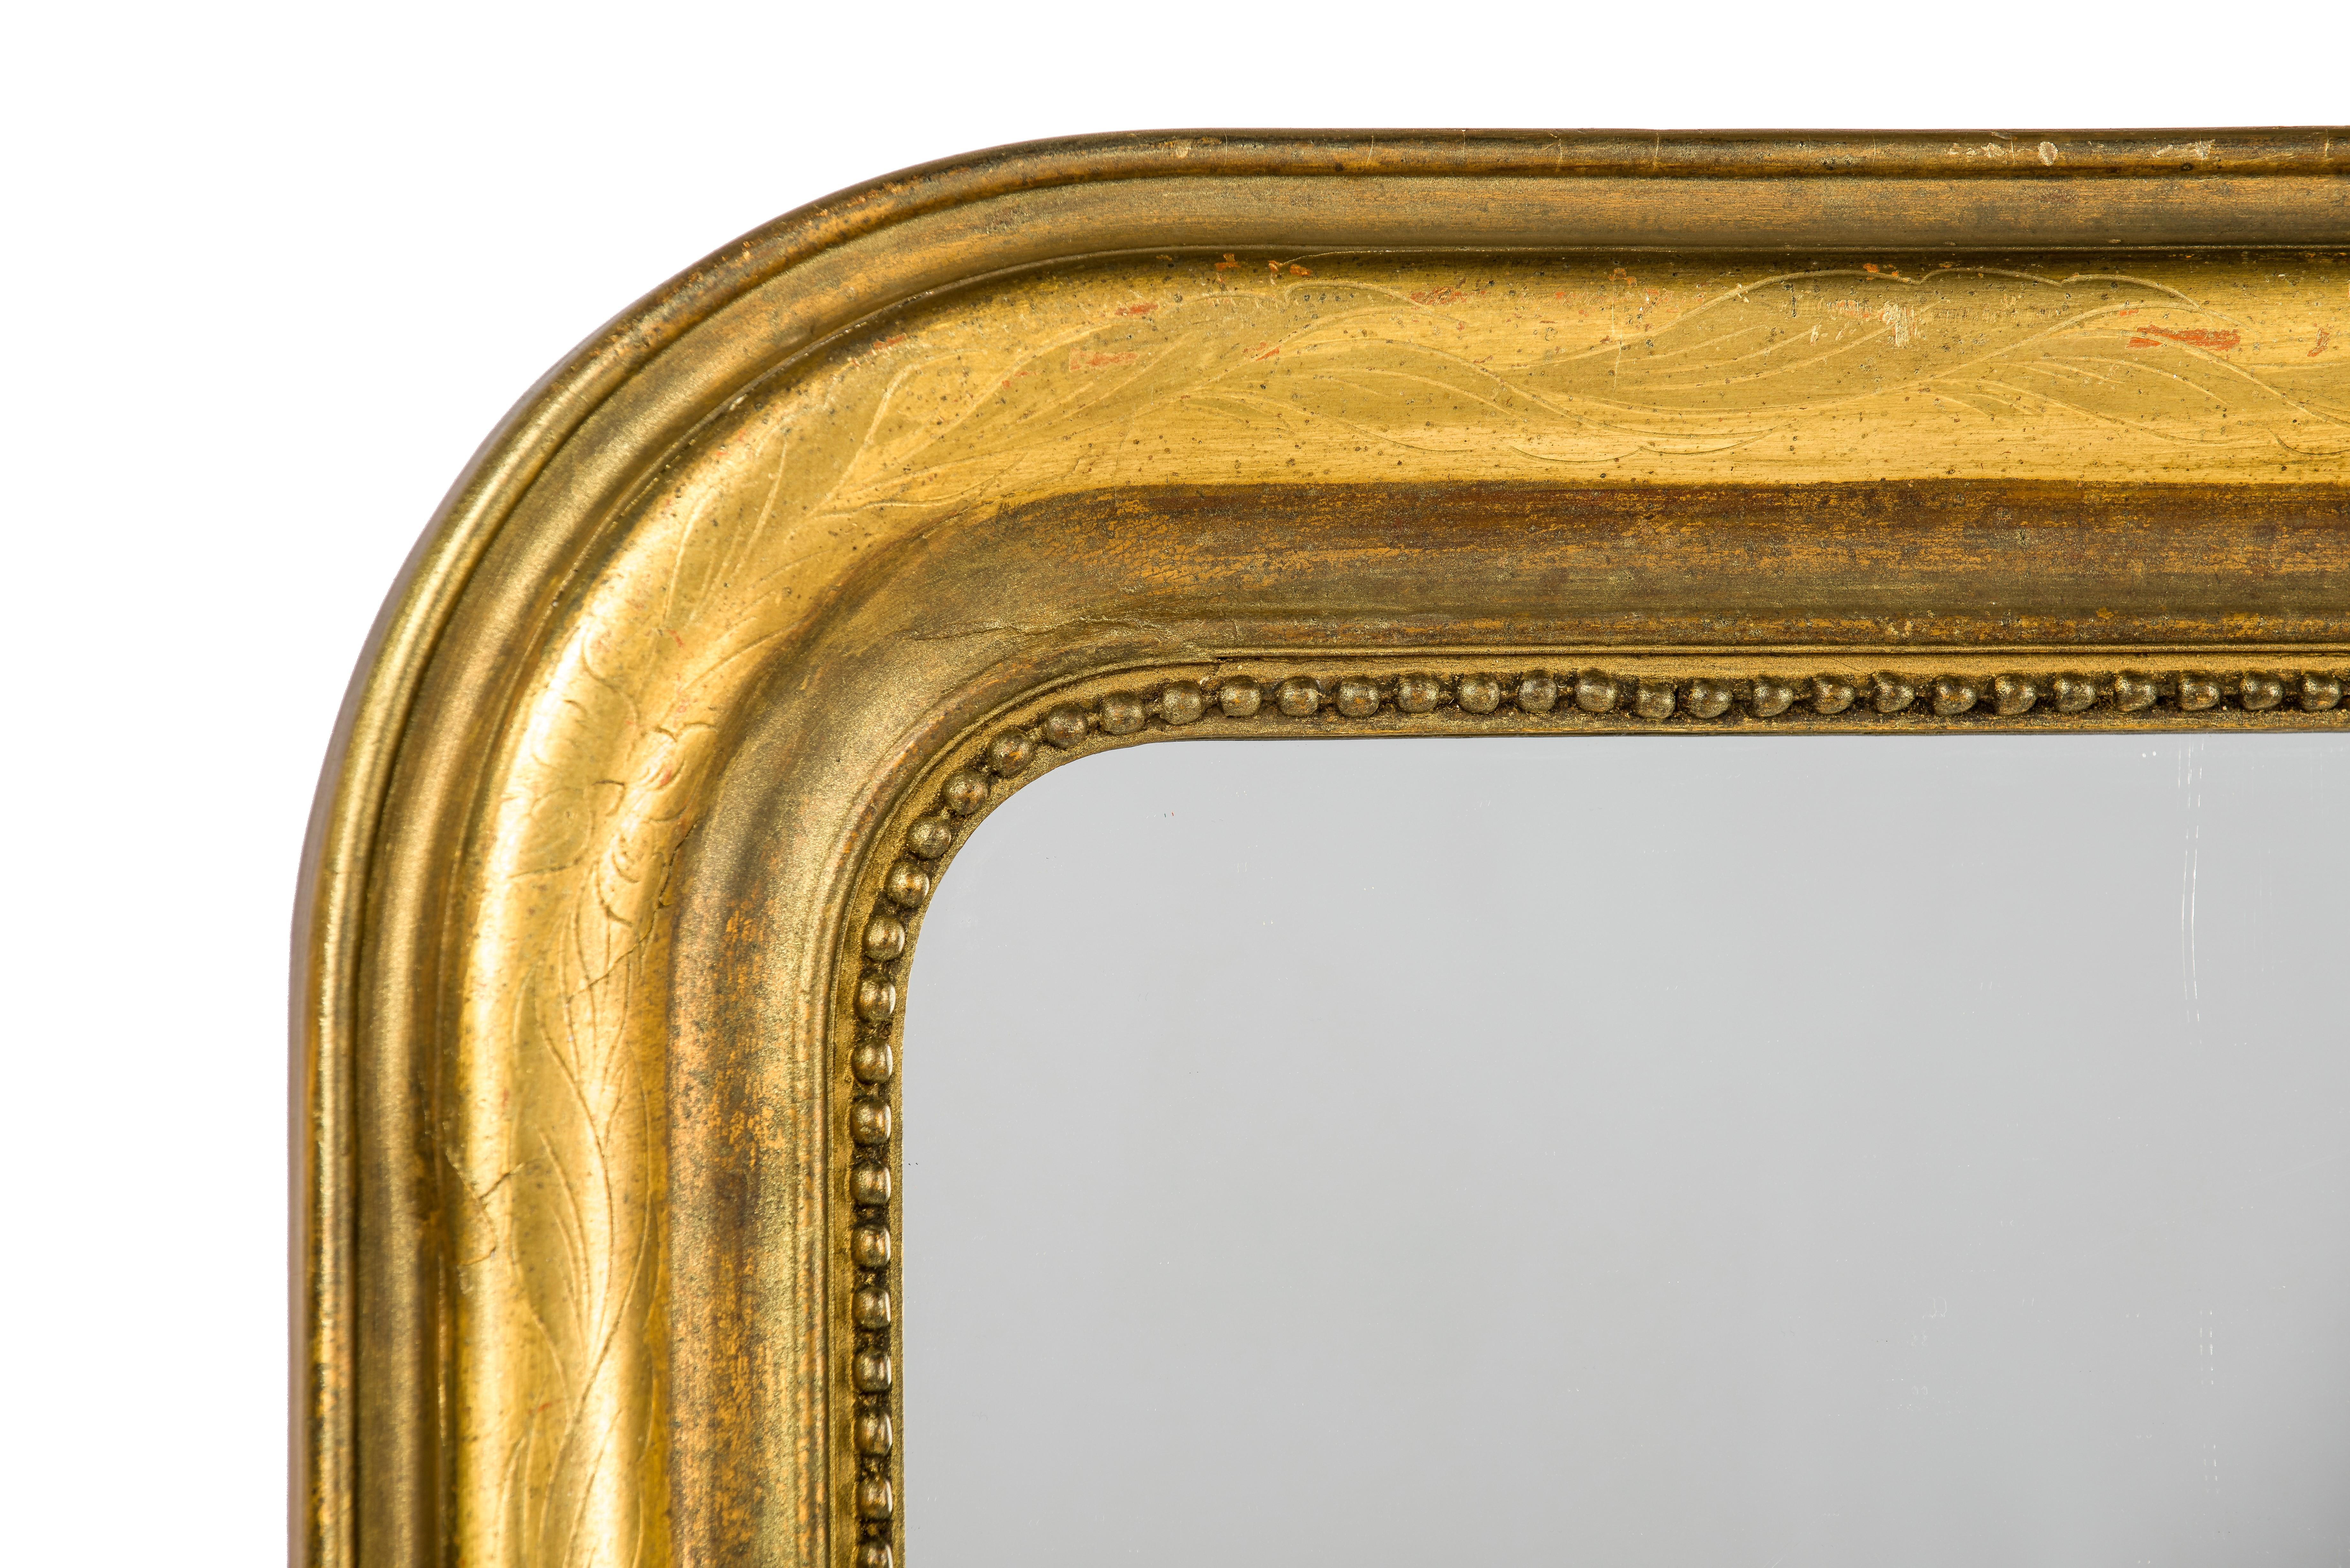 This beautiful Louis Philippe overmantel mirror was made in France, circa 1880. The mirror has a solid pine frame smoothened with gesso. The upper rounded corners are typical for the Louis Philippe style. The glass is surrounded by a classic pearl